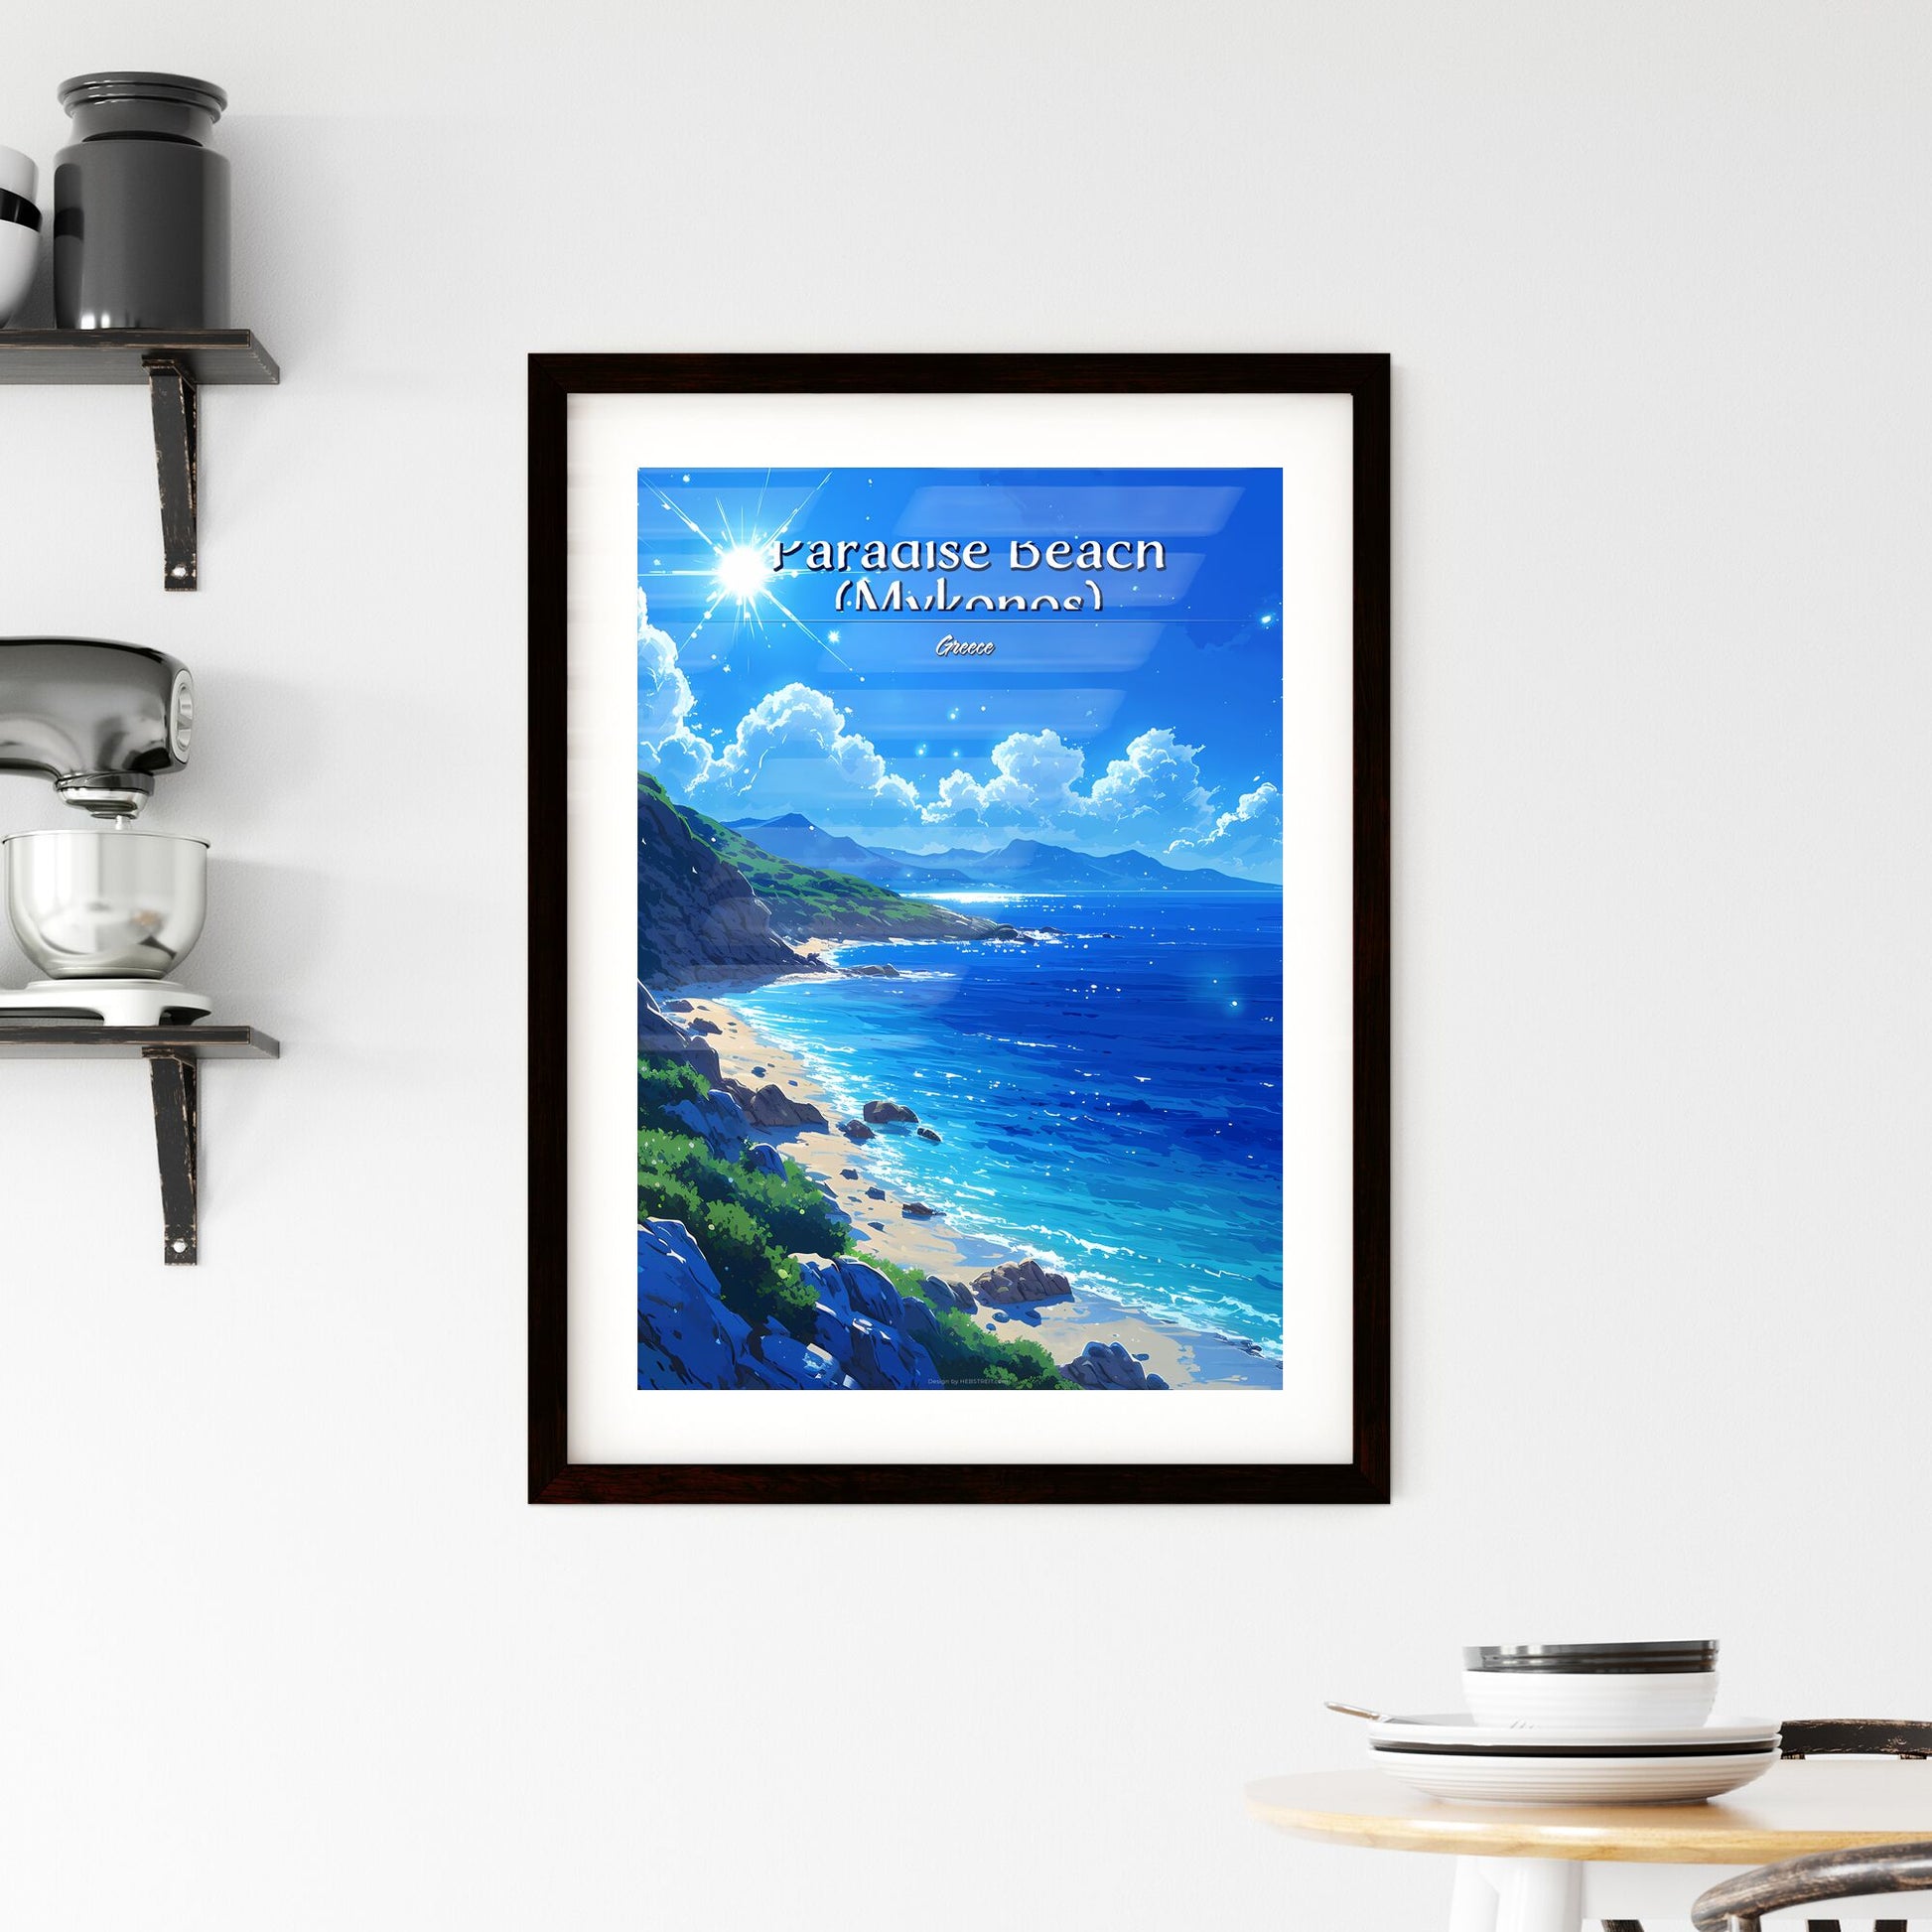 Paradise Beach (Mykonos), Greece - Art print of a beach with rocks and a body of water Default Title